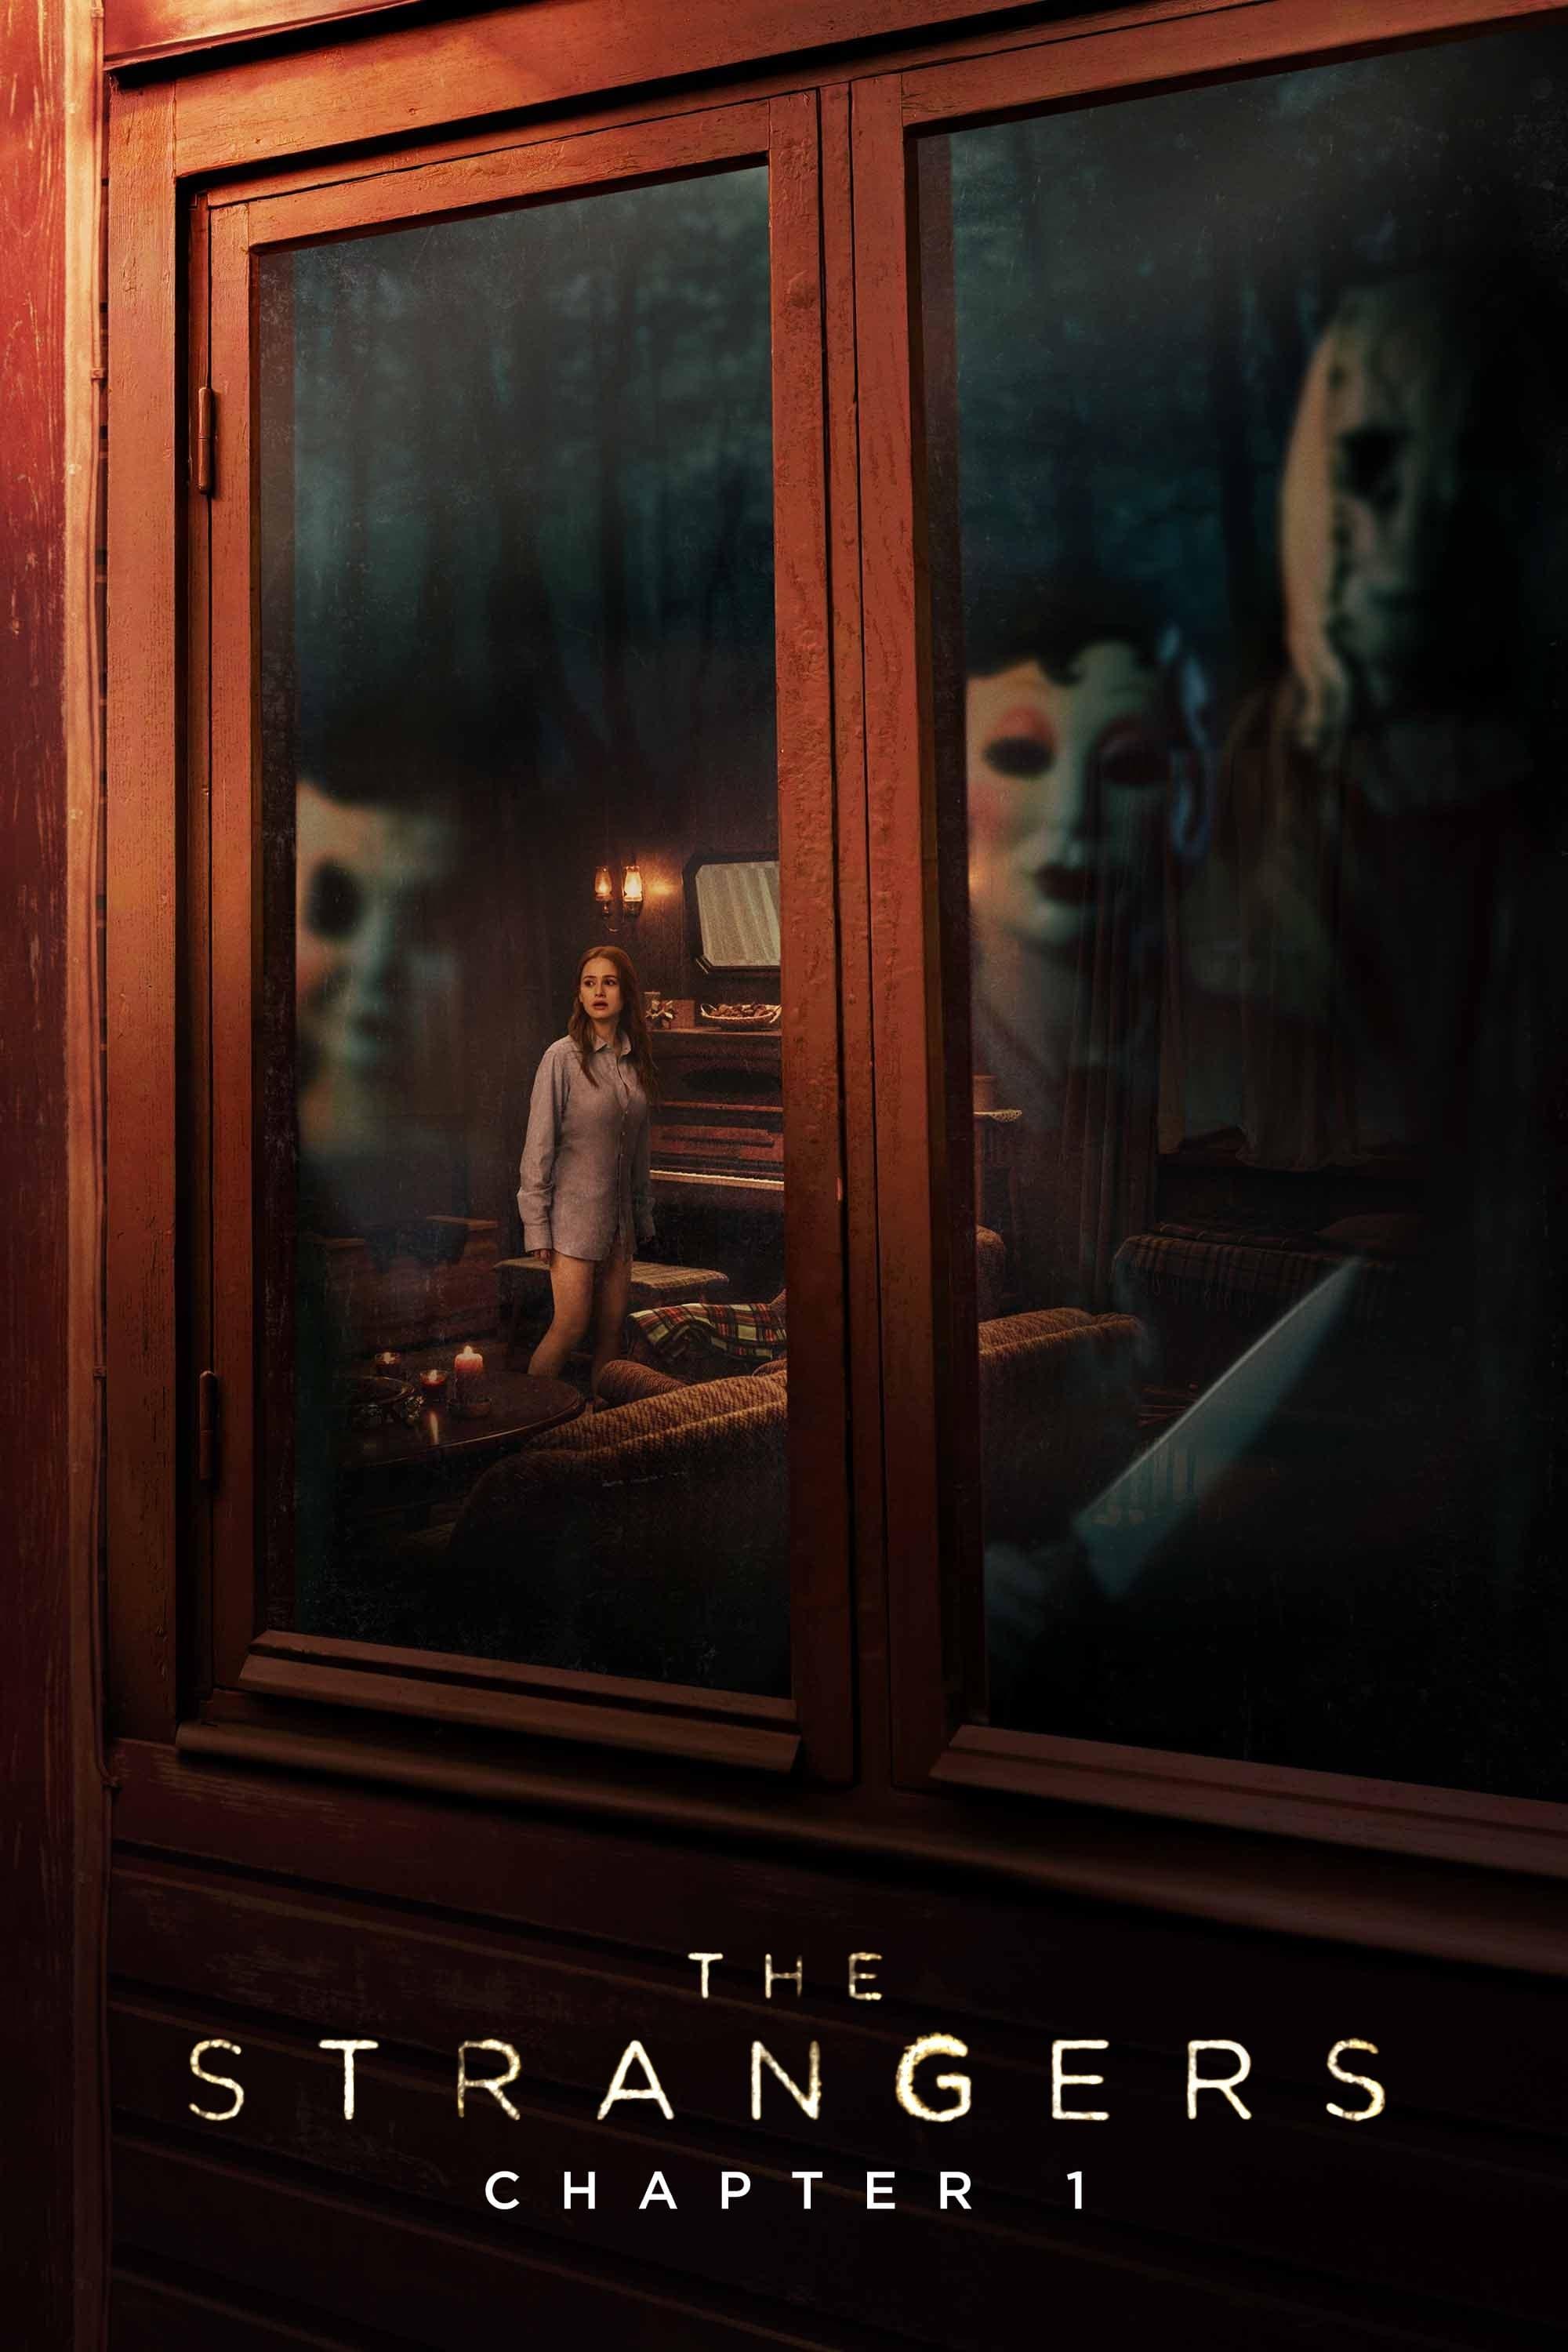 Movie poster of "The Strangers: Chapter 1"